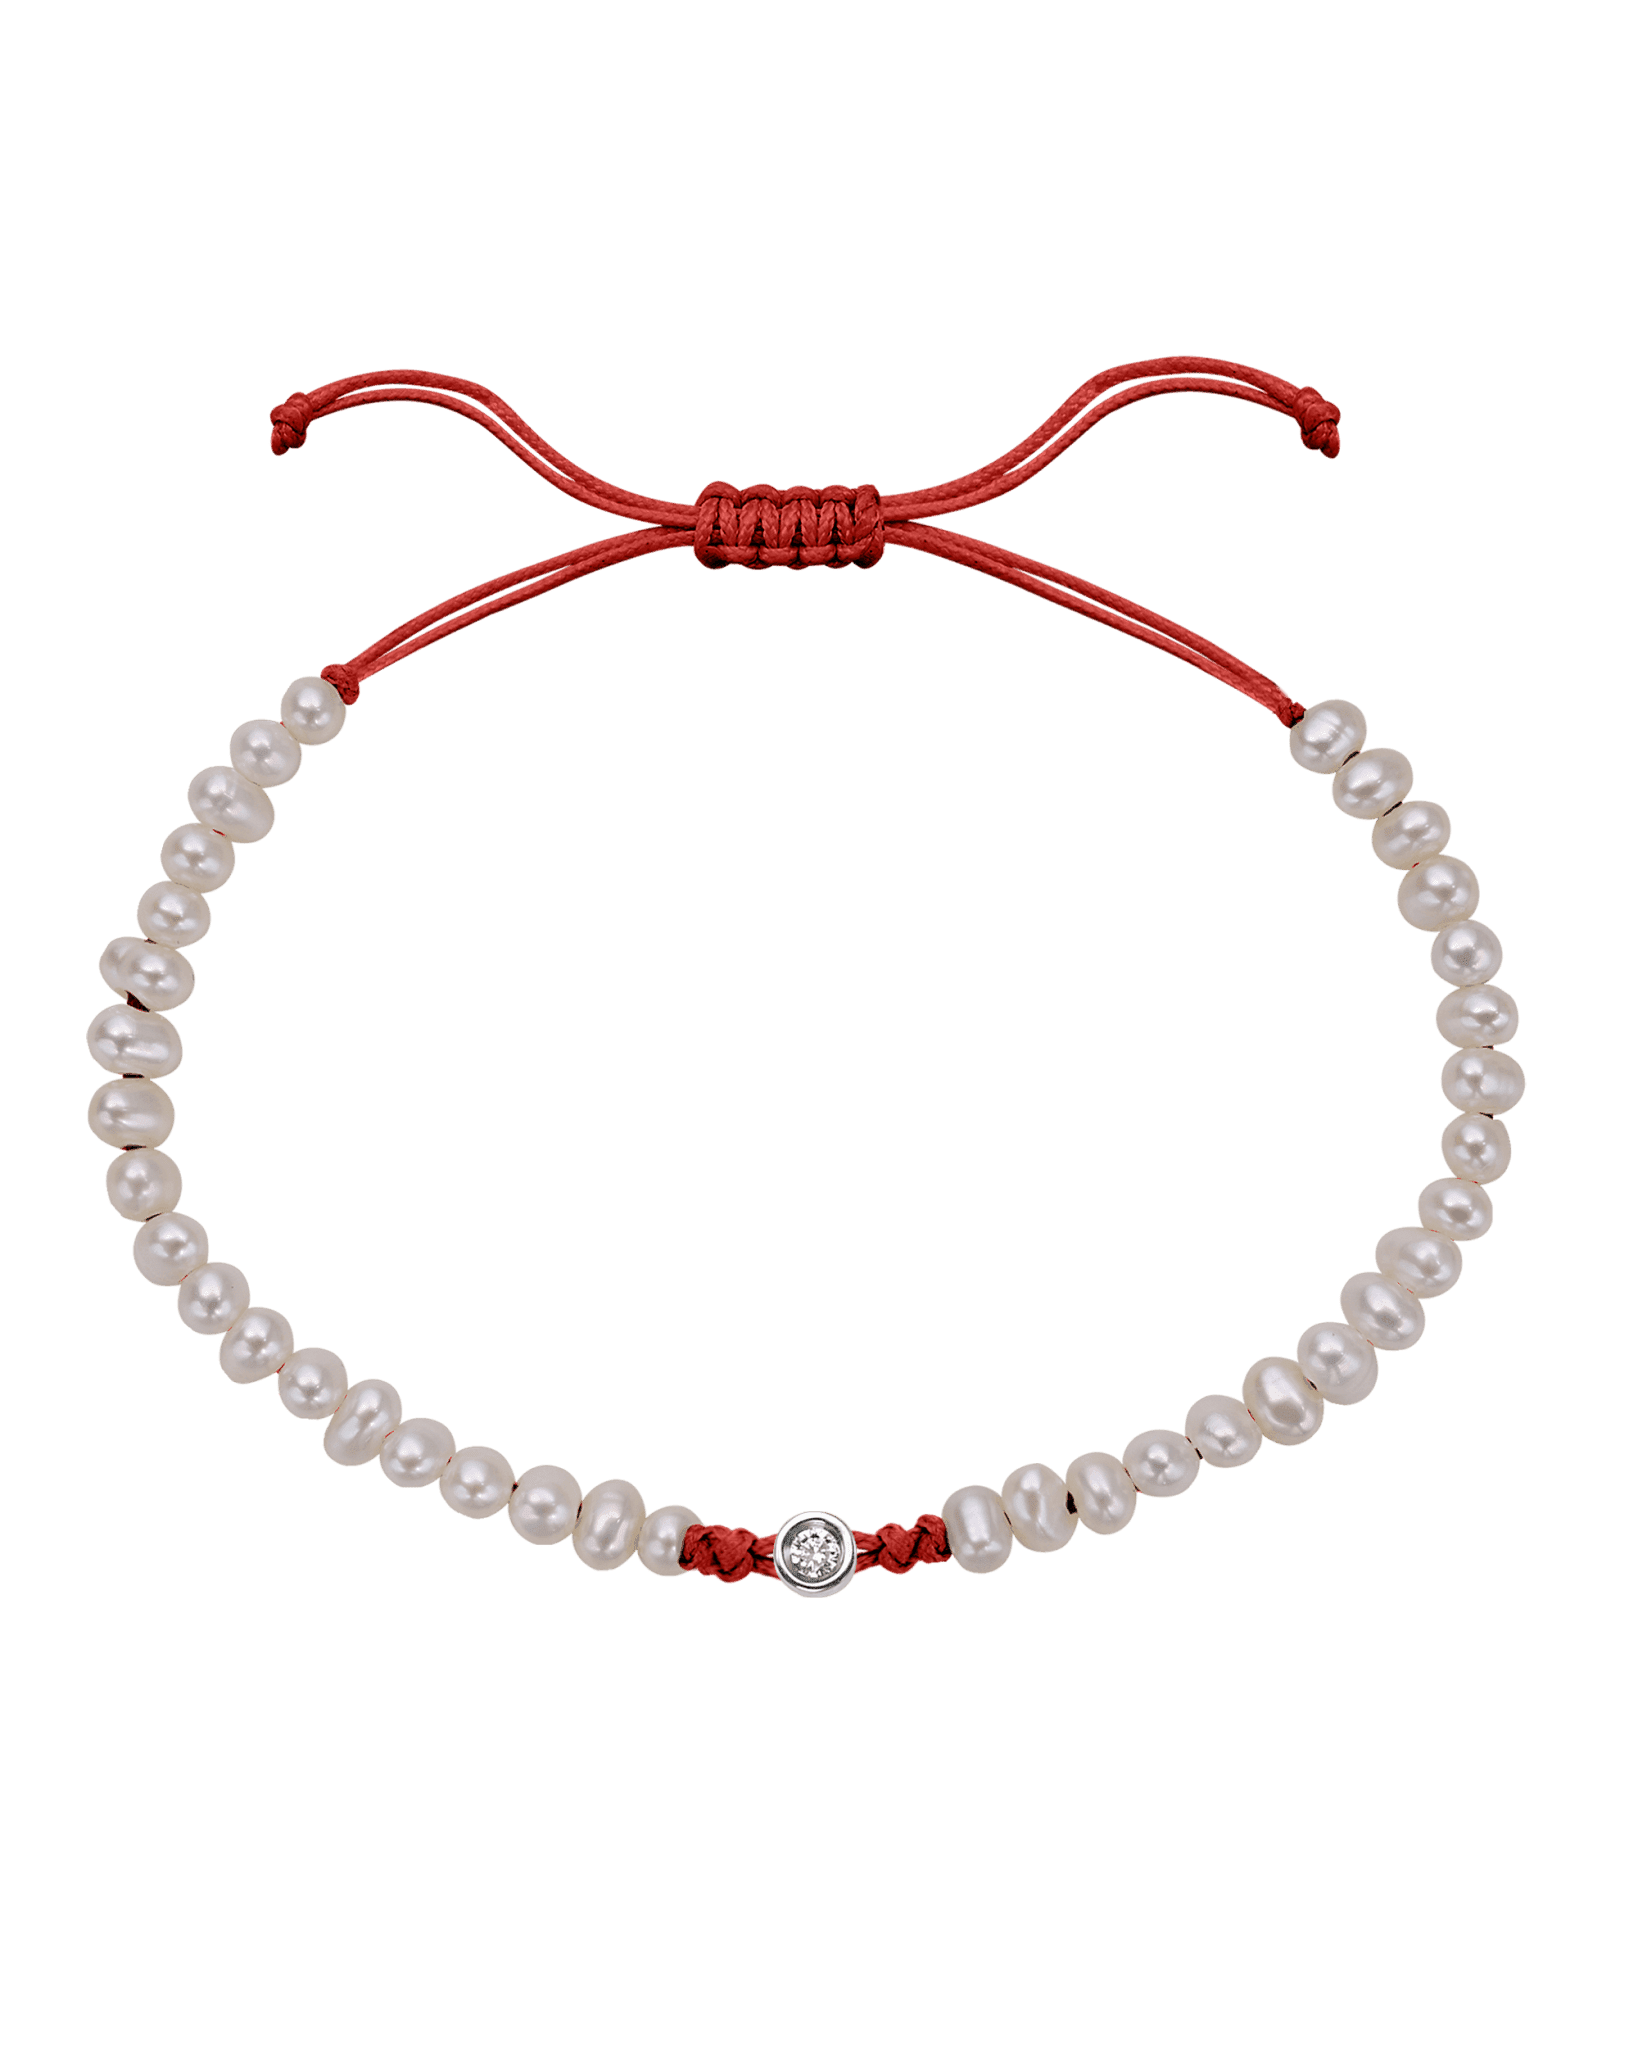 Le String of Love Perles Naturelles - Or Blanc 14 carats Bracelet magal-dev Rouge Small: 0.03 carats 